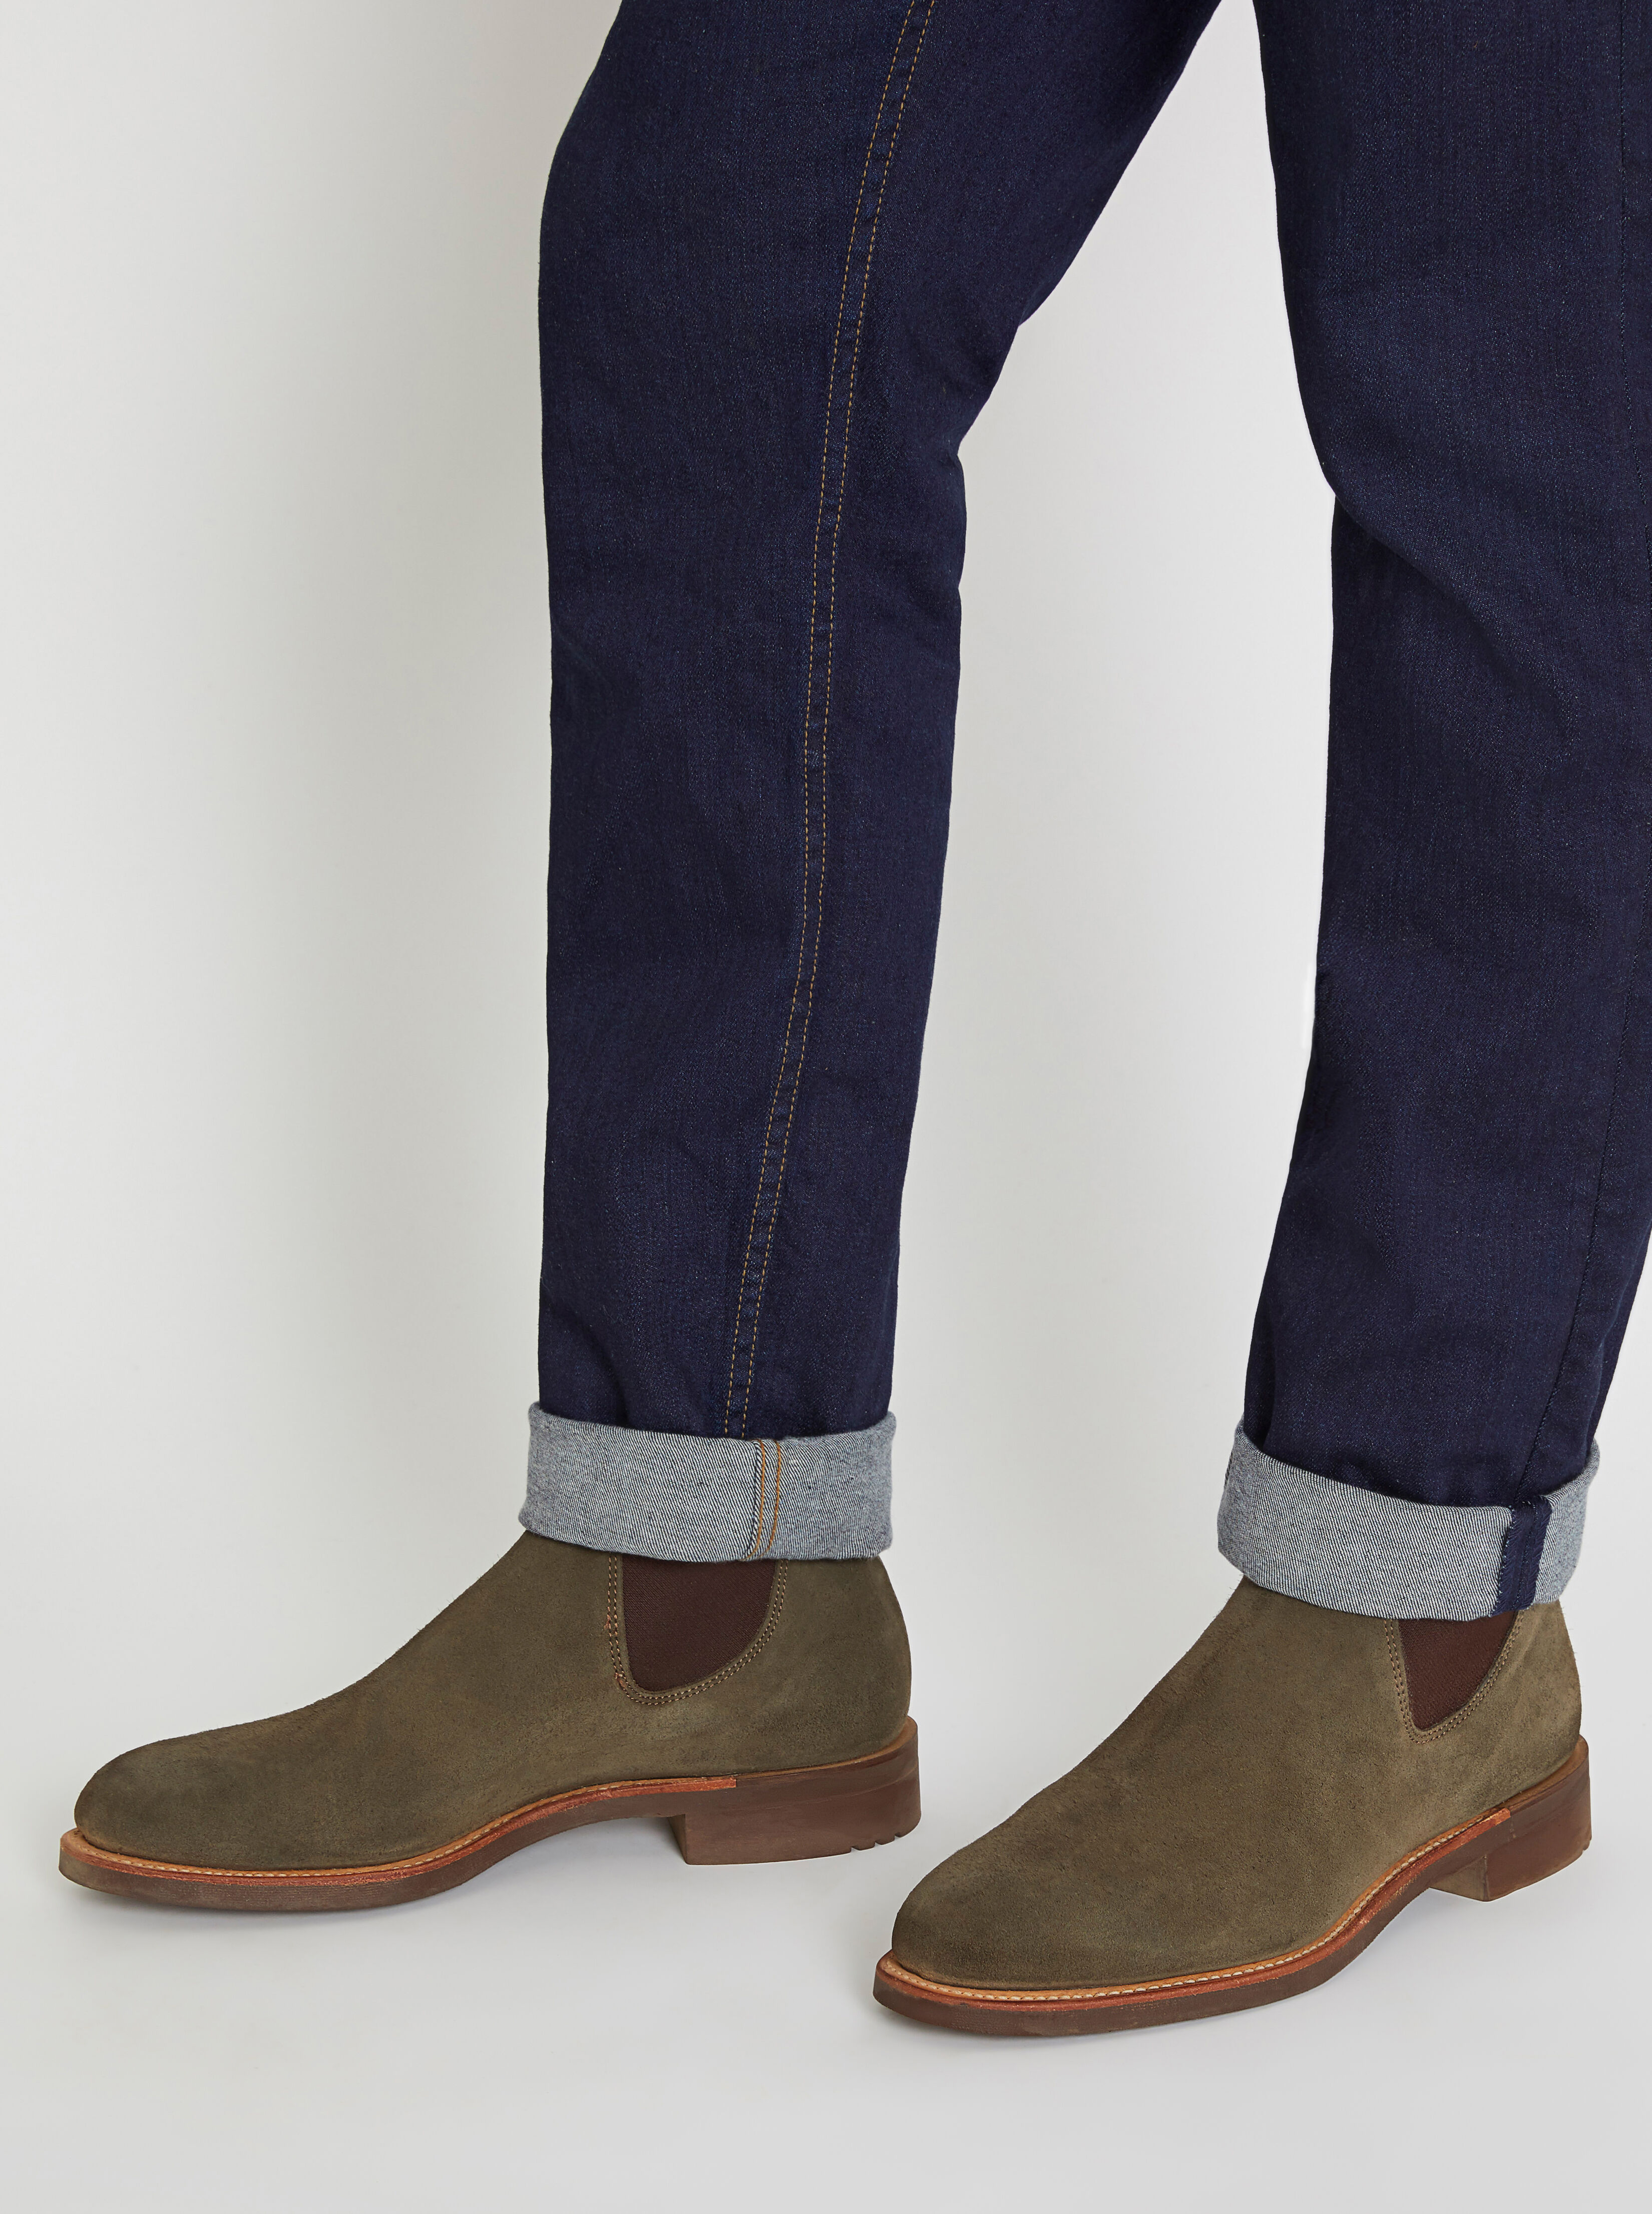 rm williams suede boots